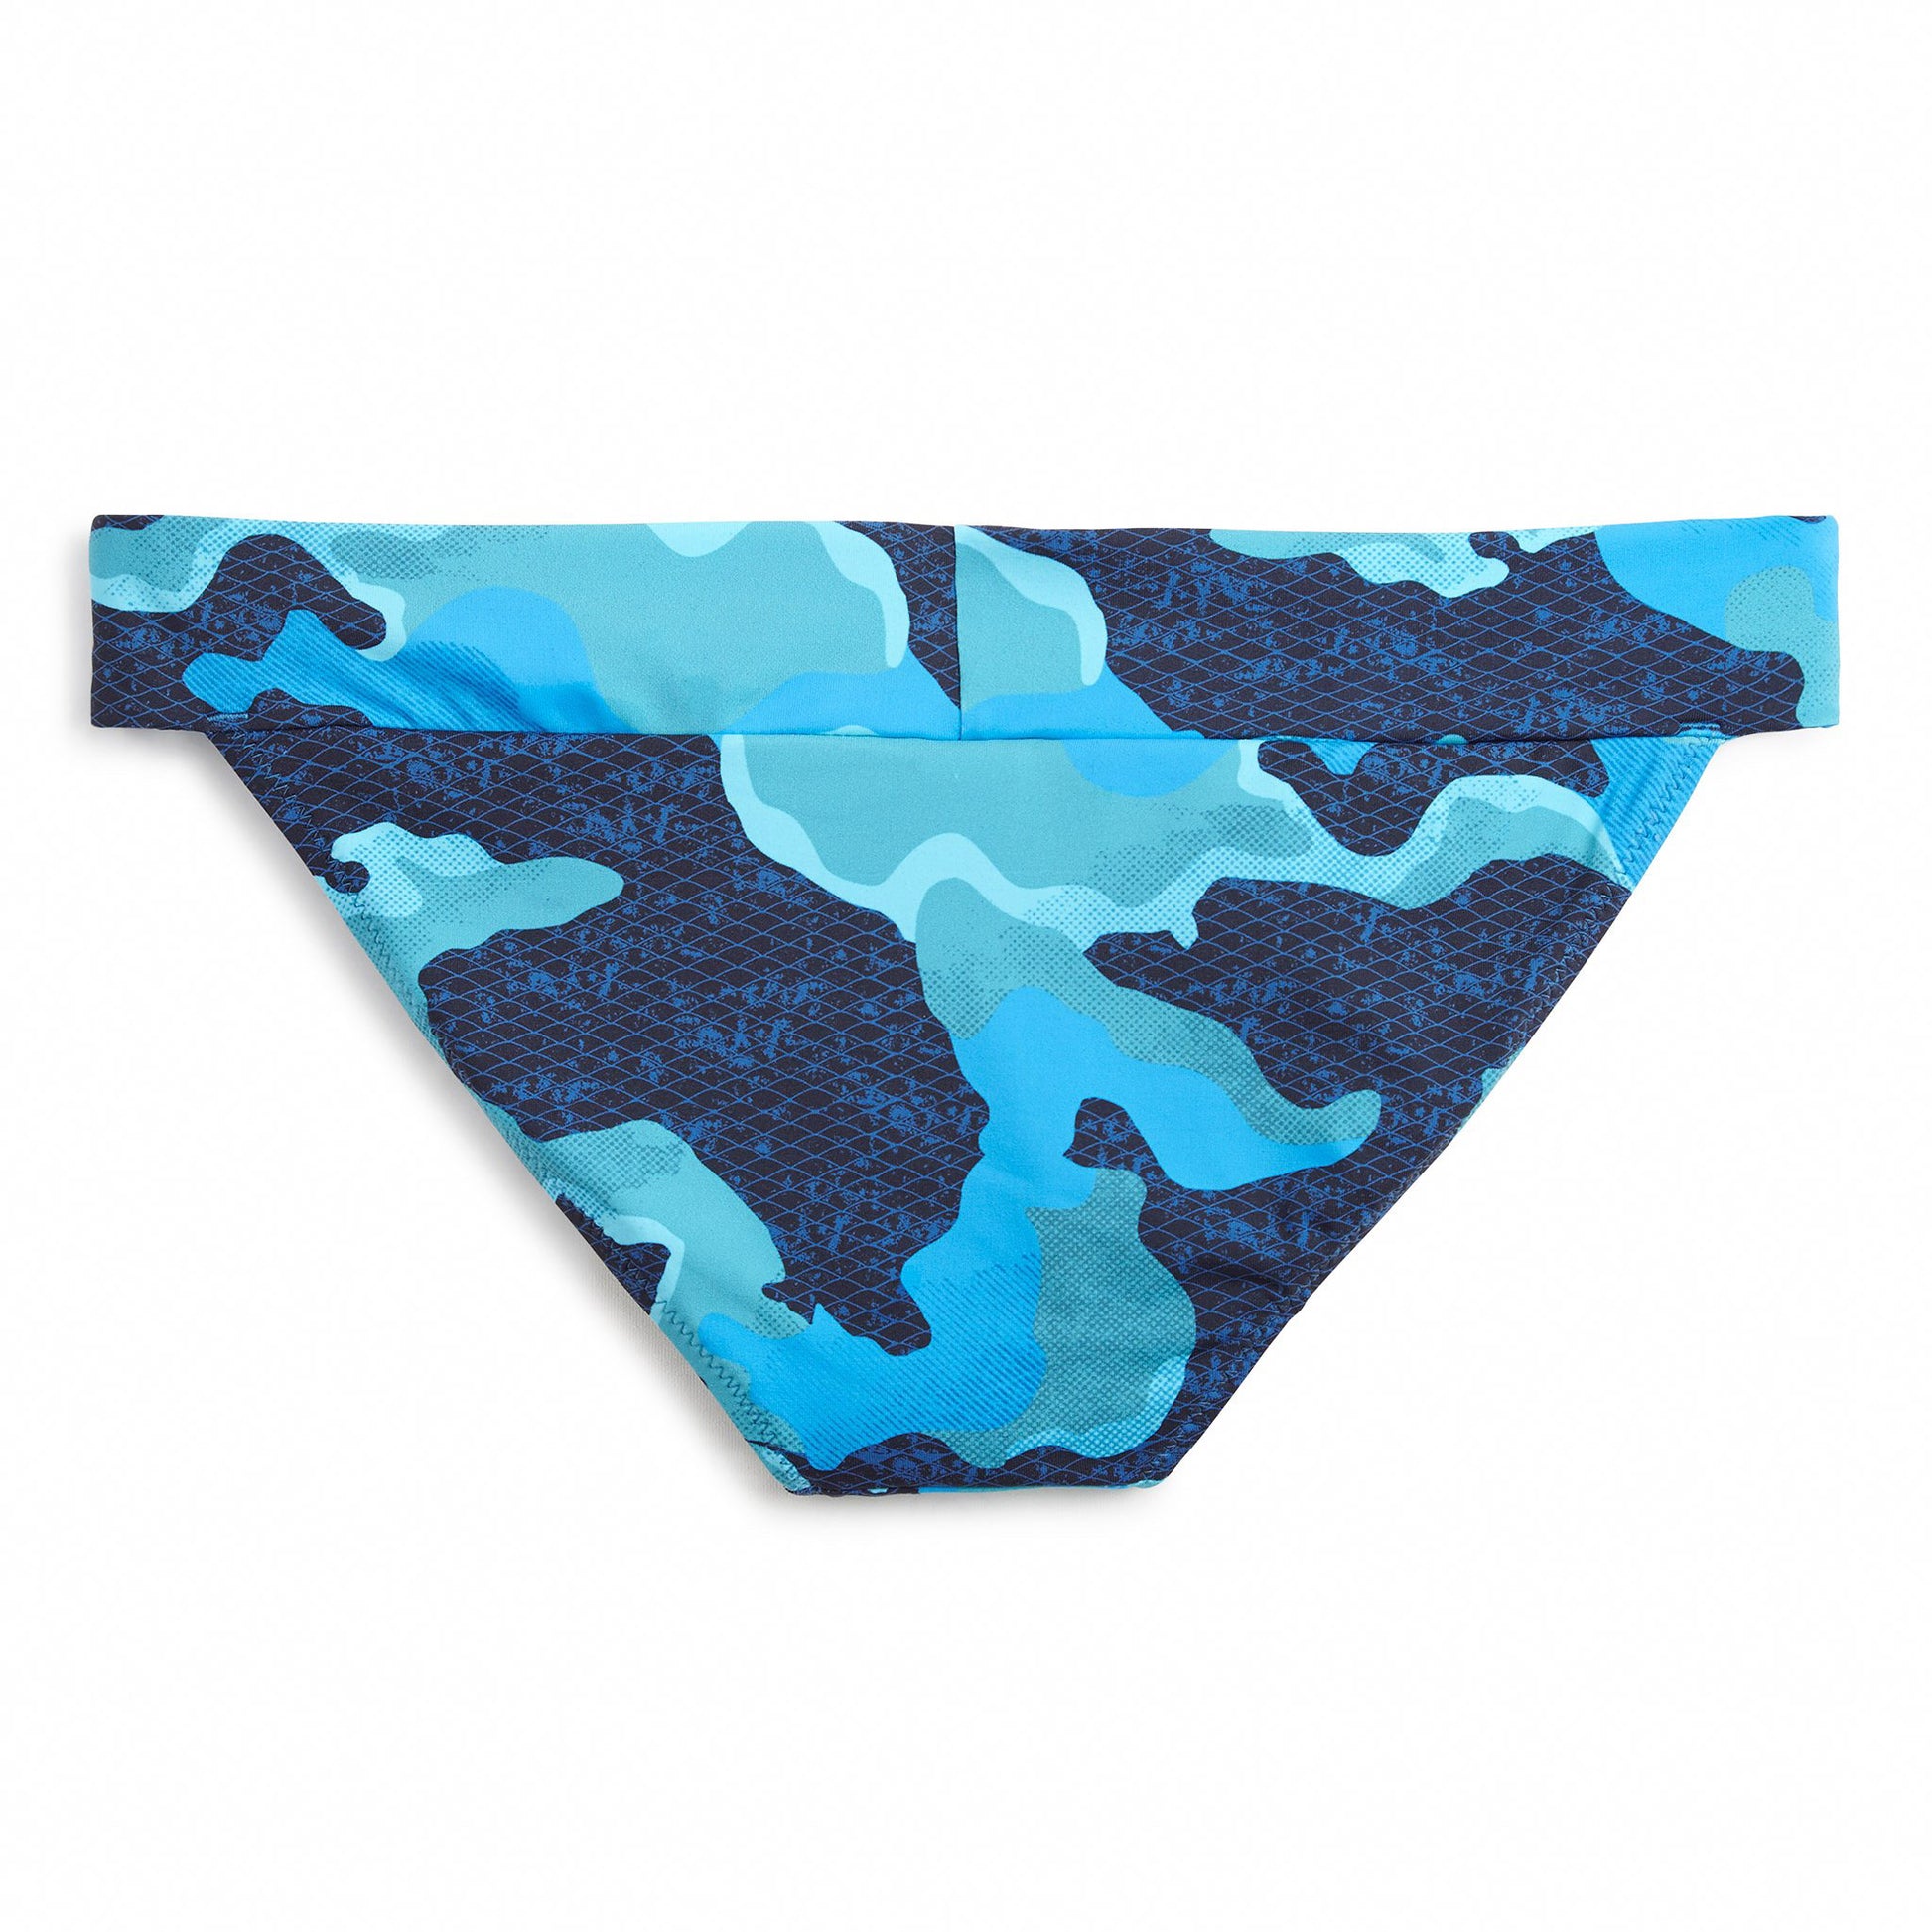 scales camo banded ac blue laydown back